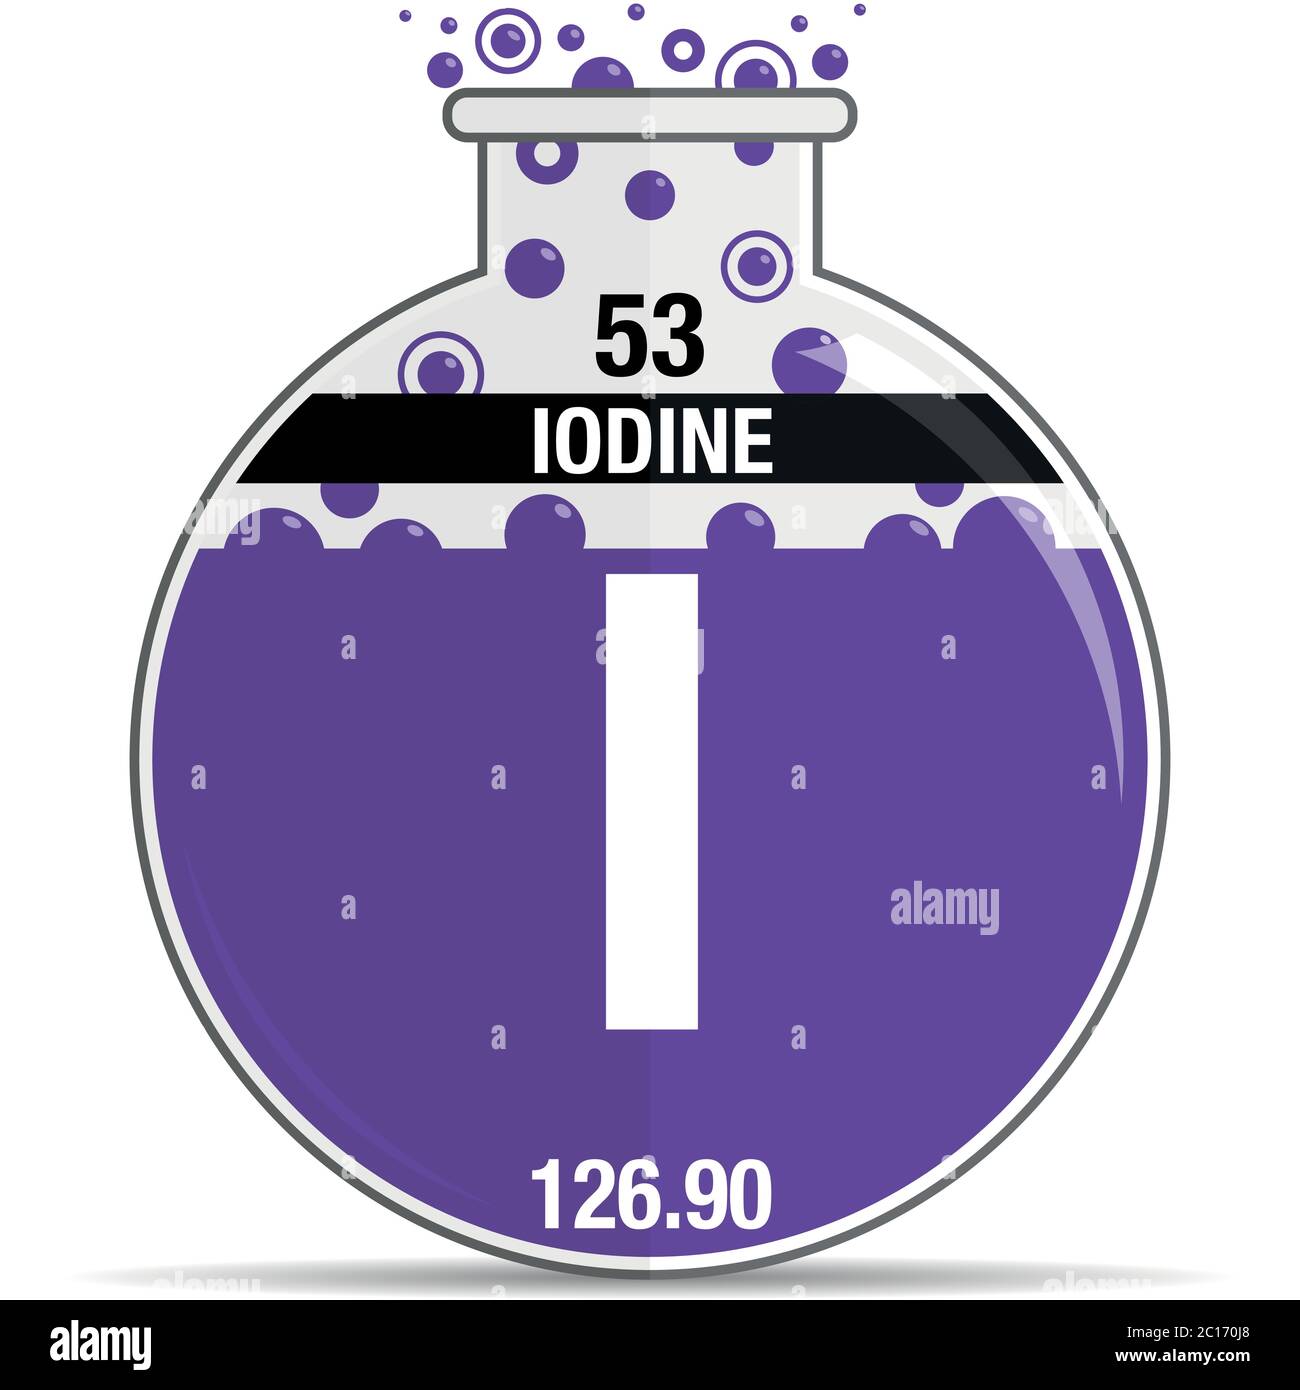 Iodine symbol on chemical round flask. Element number 53 of the Periodic Table of the Elements - Chemistry. Vector image Stock Vector